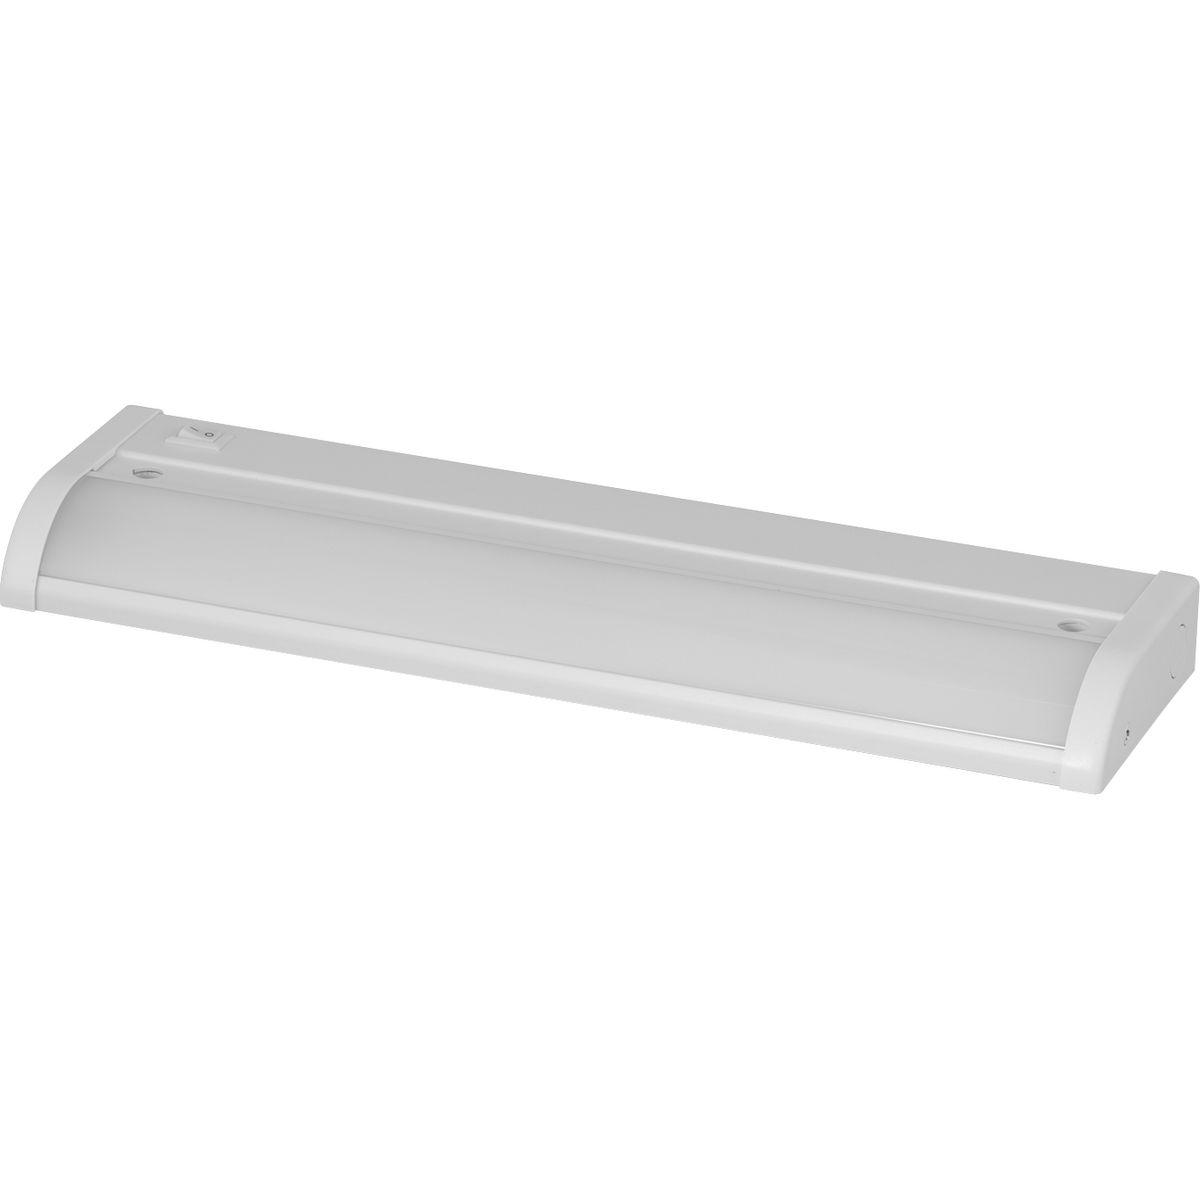 Hubbell P700001-028-30 The HIDE-A-LITE V 11-1/2" linear undercabinet fixture provides the ideal solution for residential and light commercial applications. Extruded aluminum construction featuring a lens design to optimizes light distribution to ensure proper illumination. The 